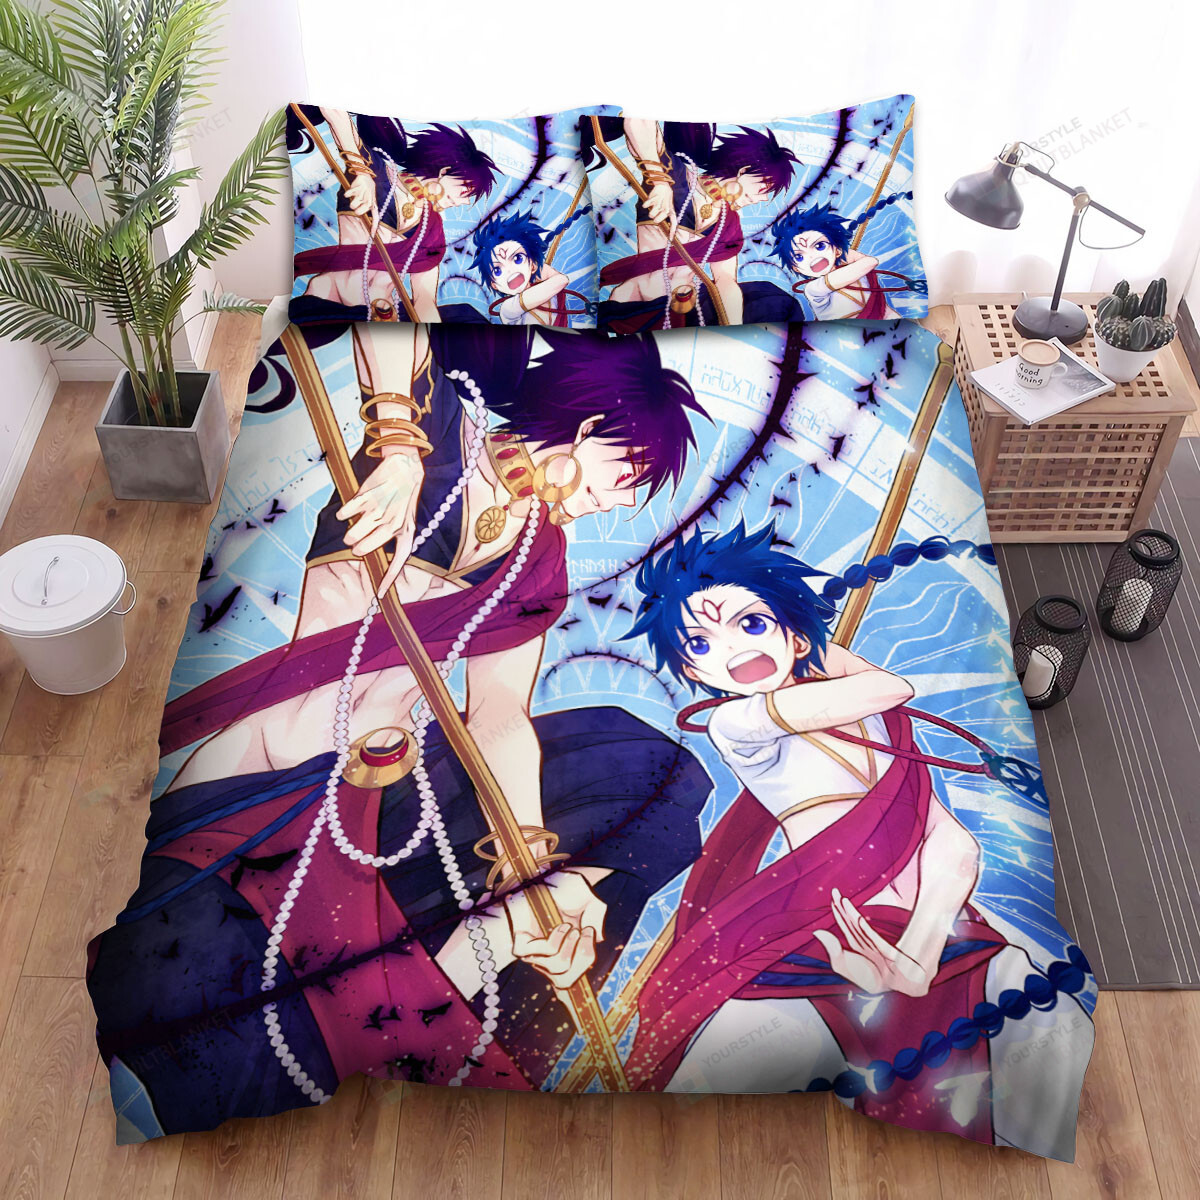 Magi Aladdin And Judal Fighting Bed Sheets Spread Comforter Duvet Cover Bedding Sets